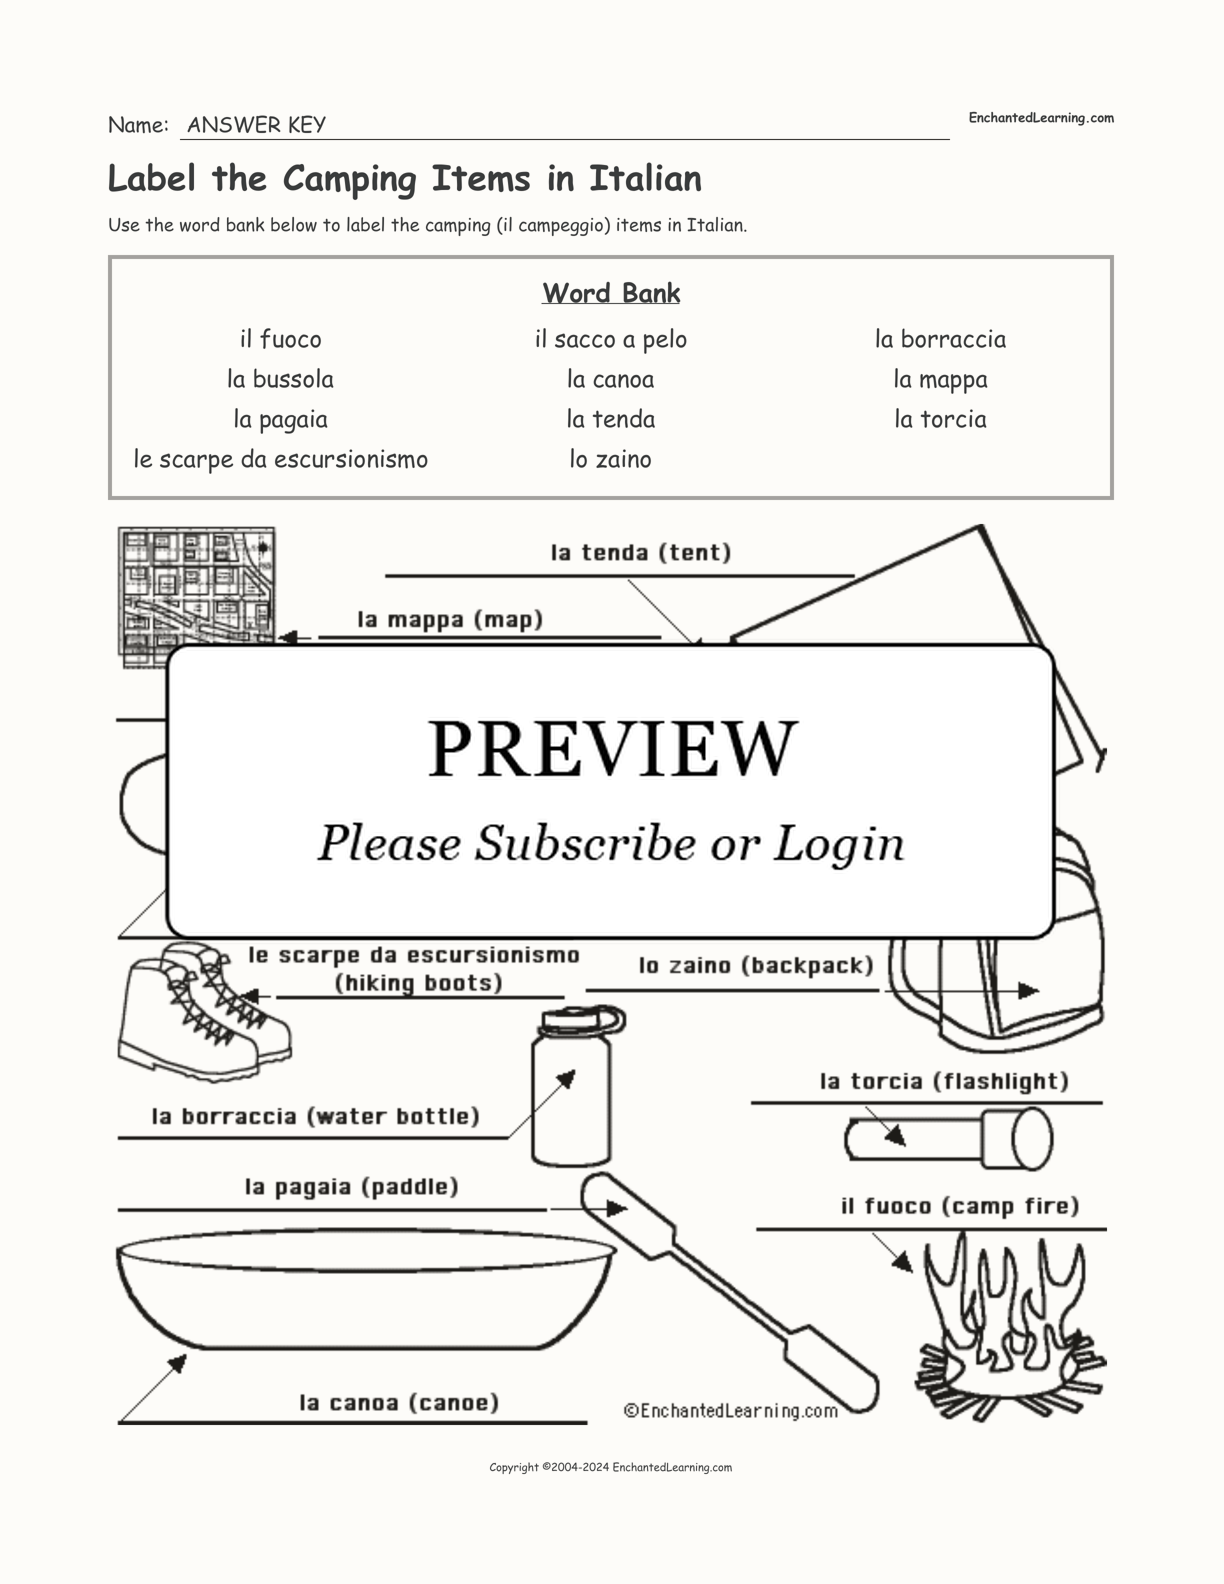 Label the Camping Items in Italian interactive worksheet page 2